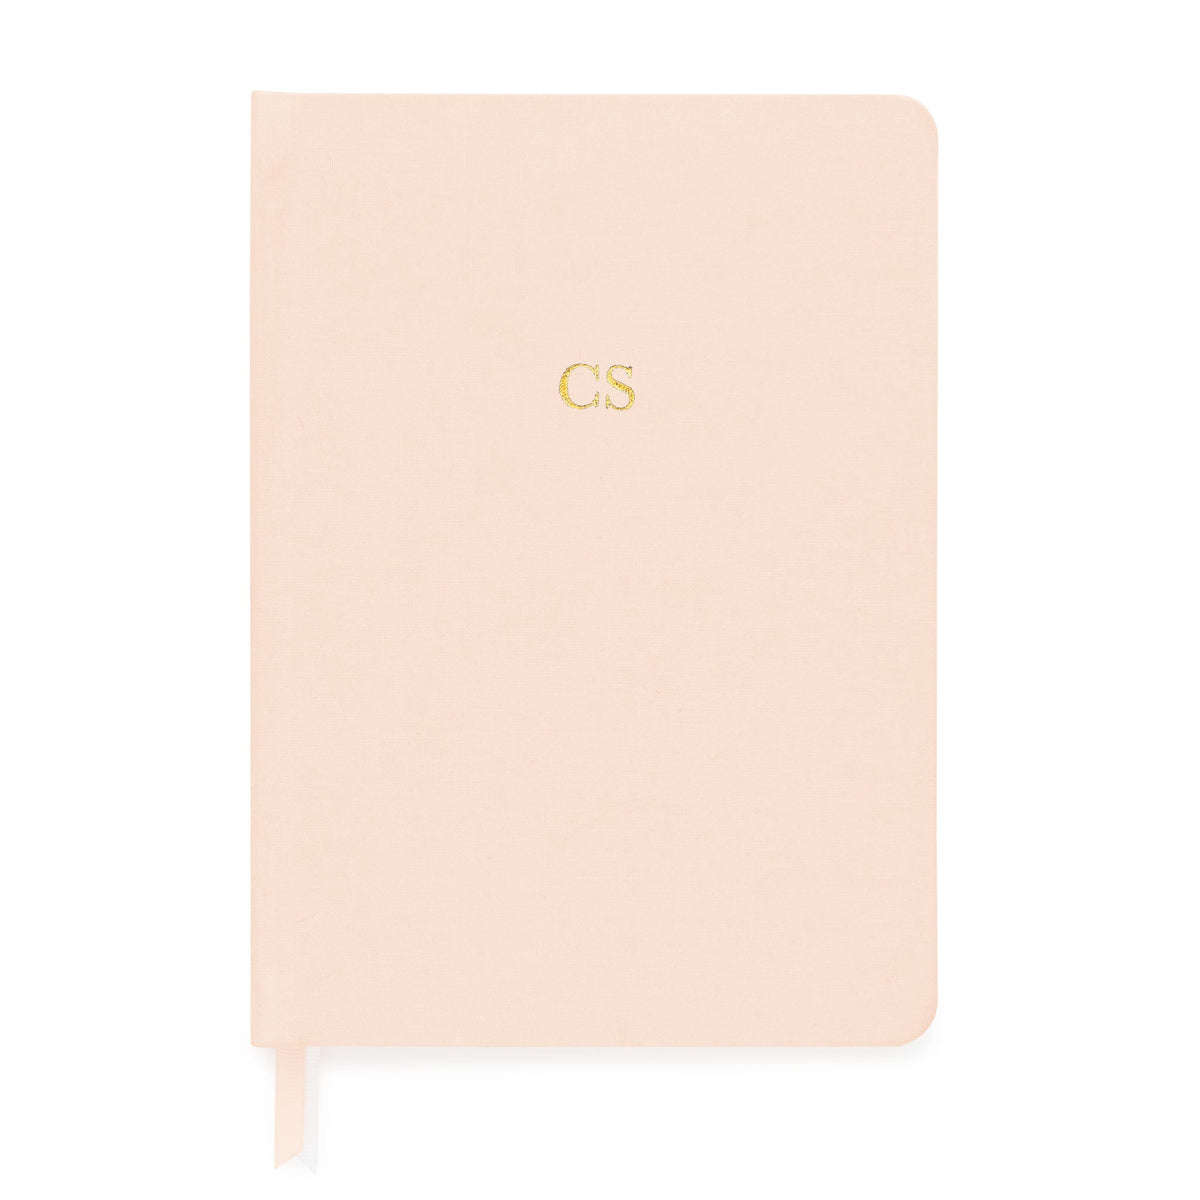 Pink fabric journal with gold monogram